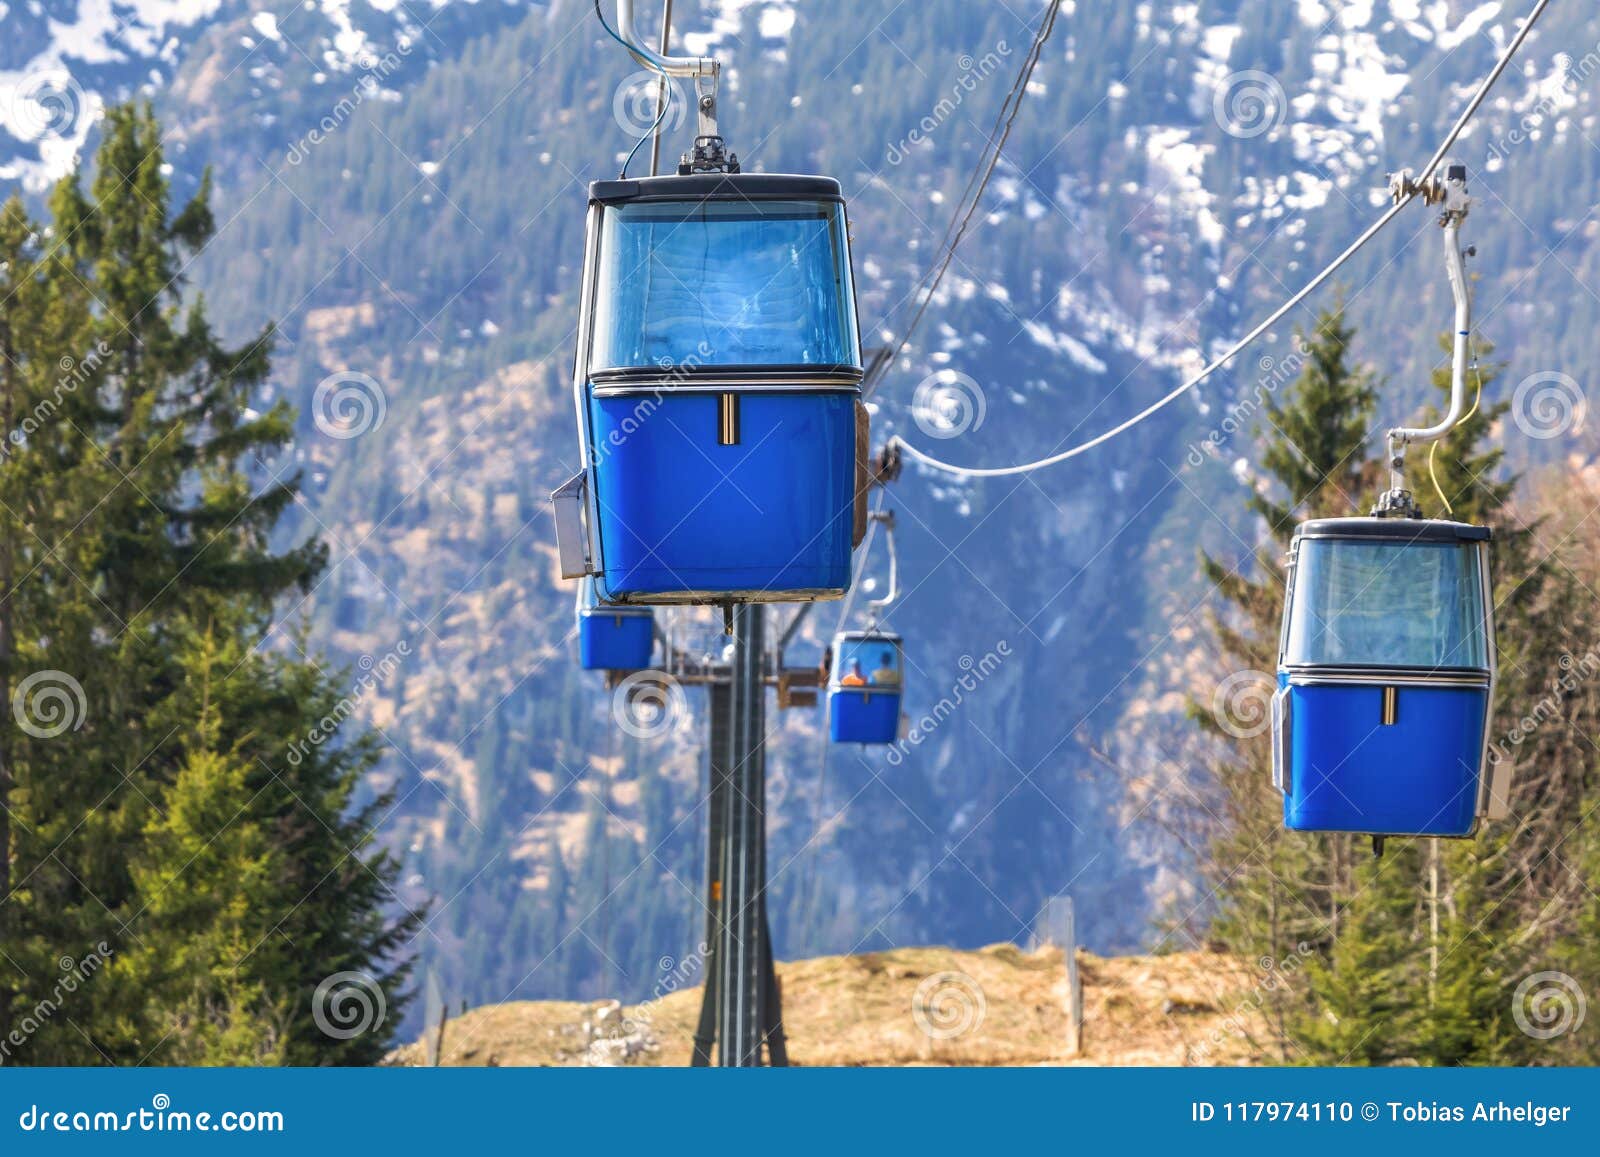 Small Funicular in Front of Mountain Hills Stock Photo - Image of